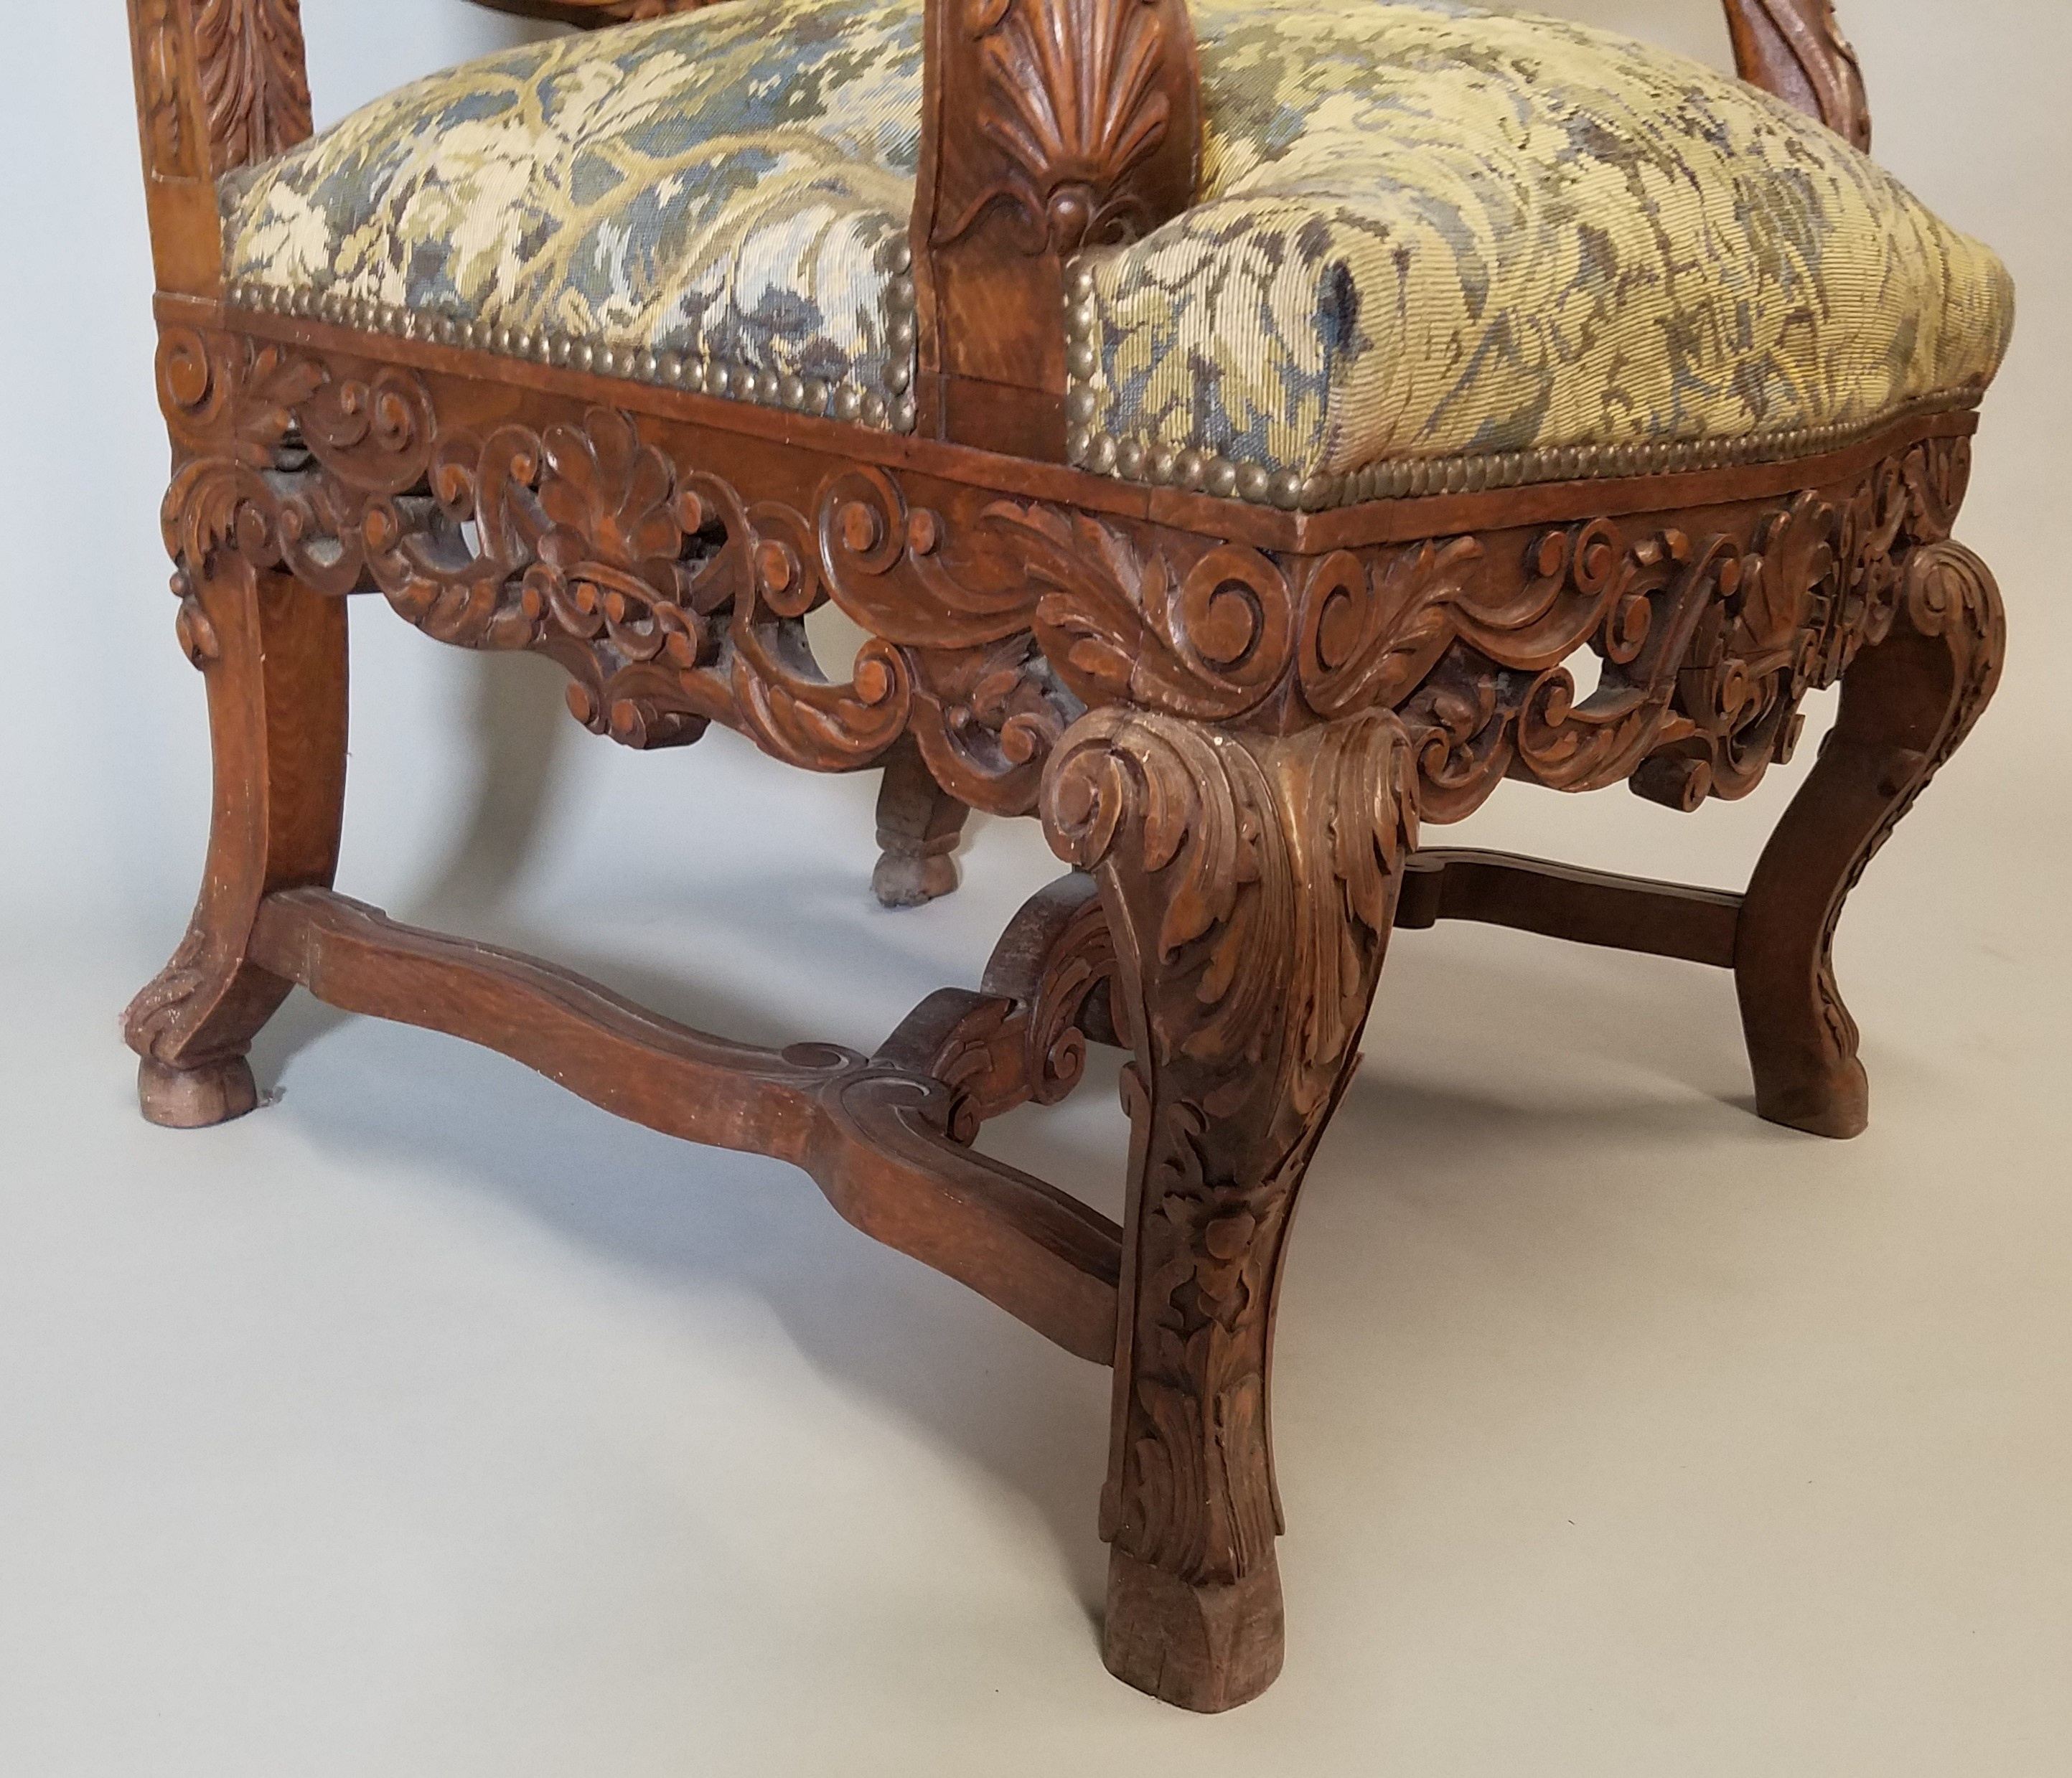 A Pair of Louis XV Style Carved wood arm chairs